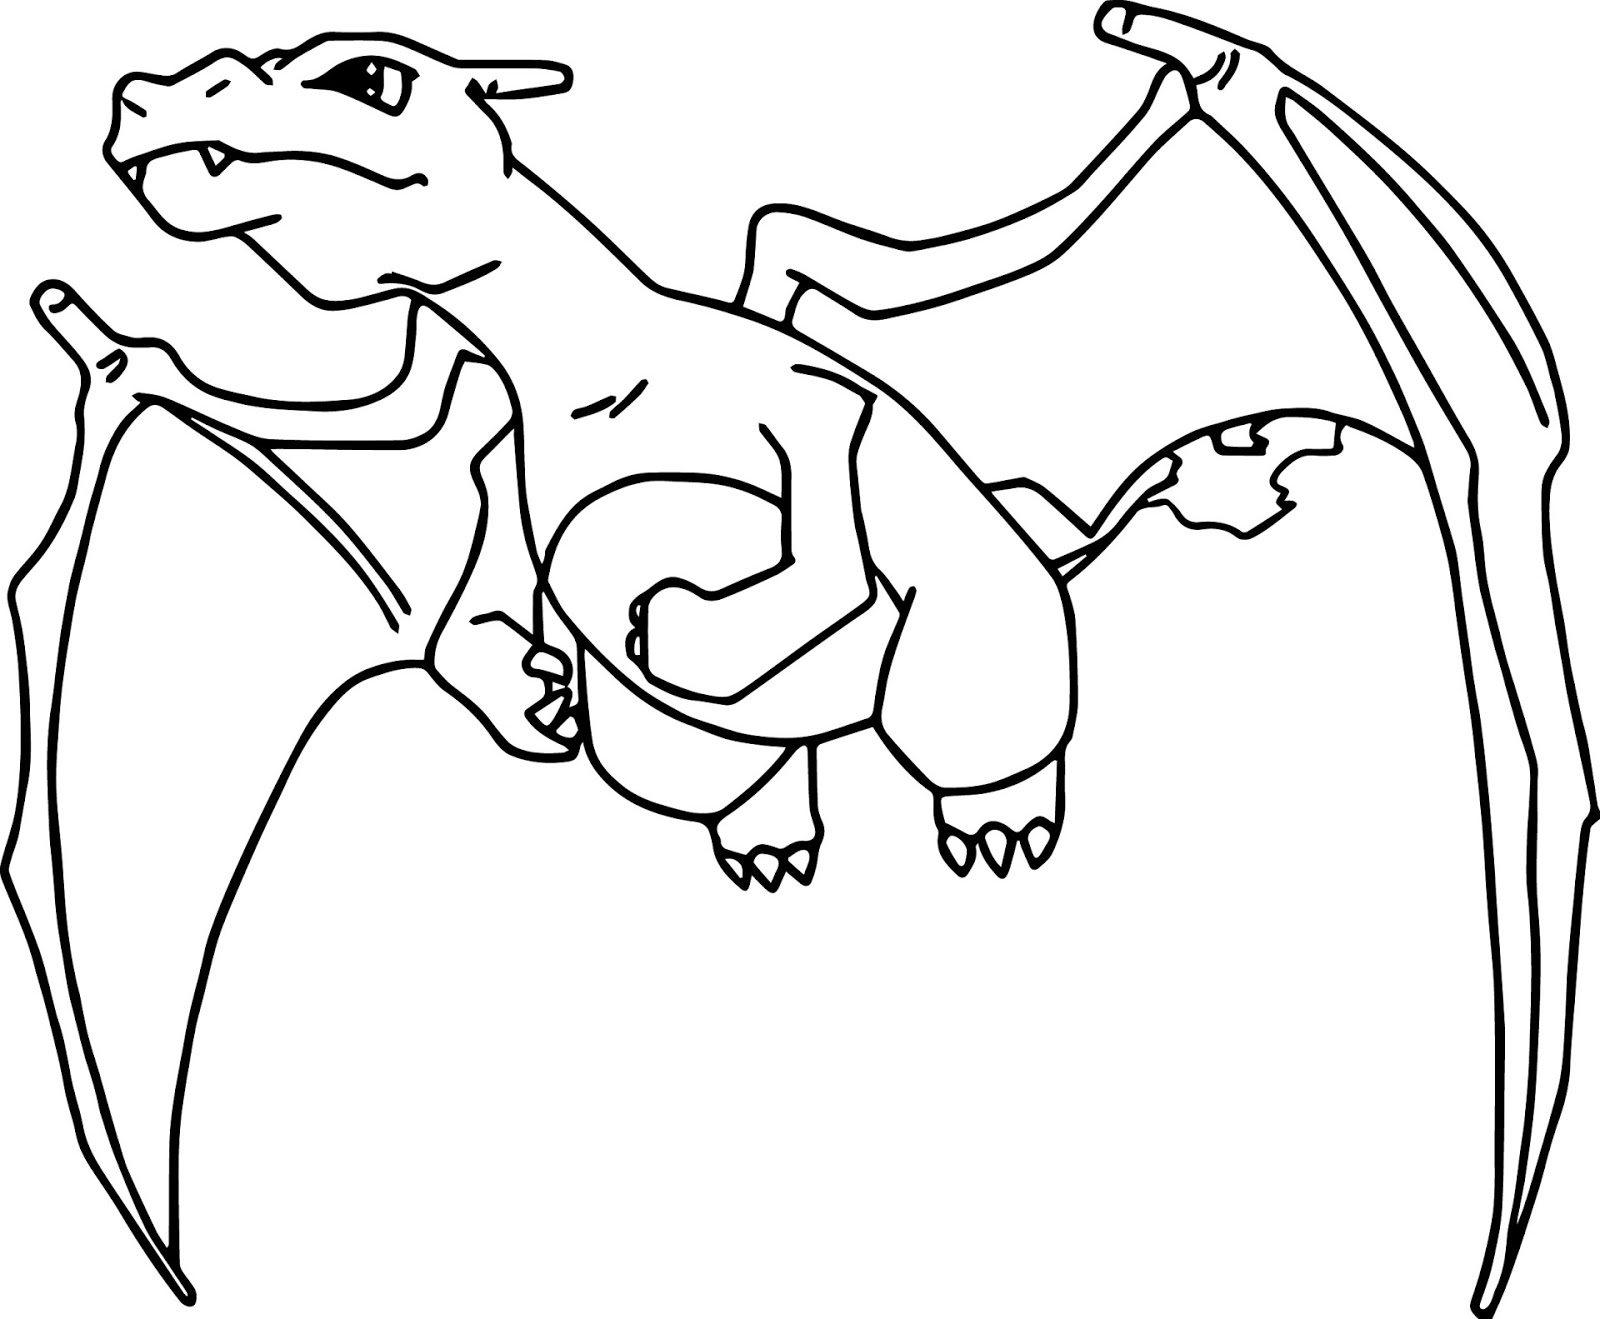 mega-charizard-x-coloring-pages-coloring-home